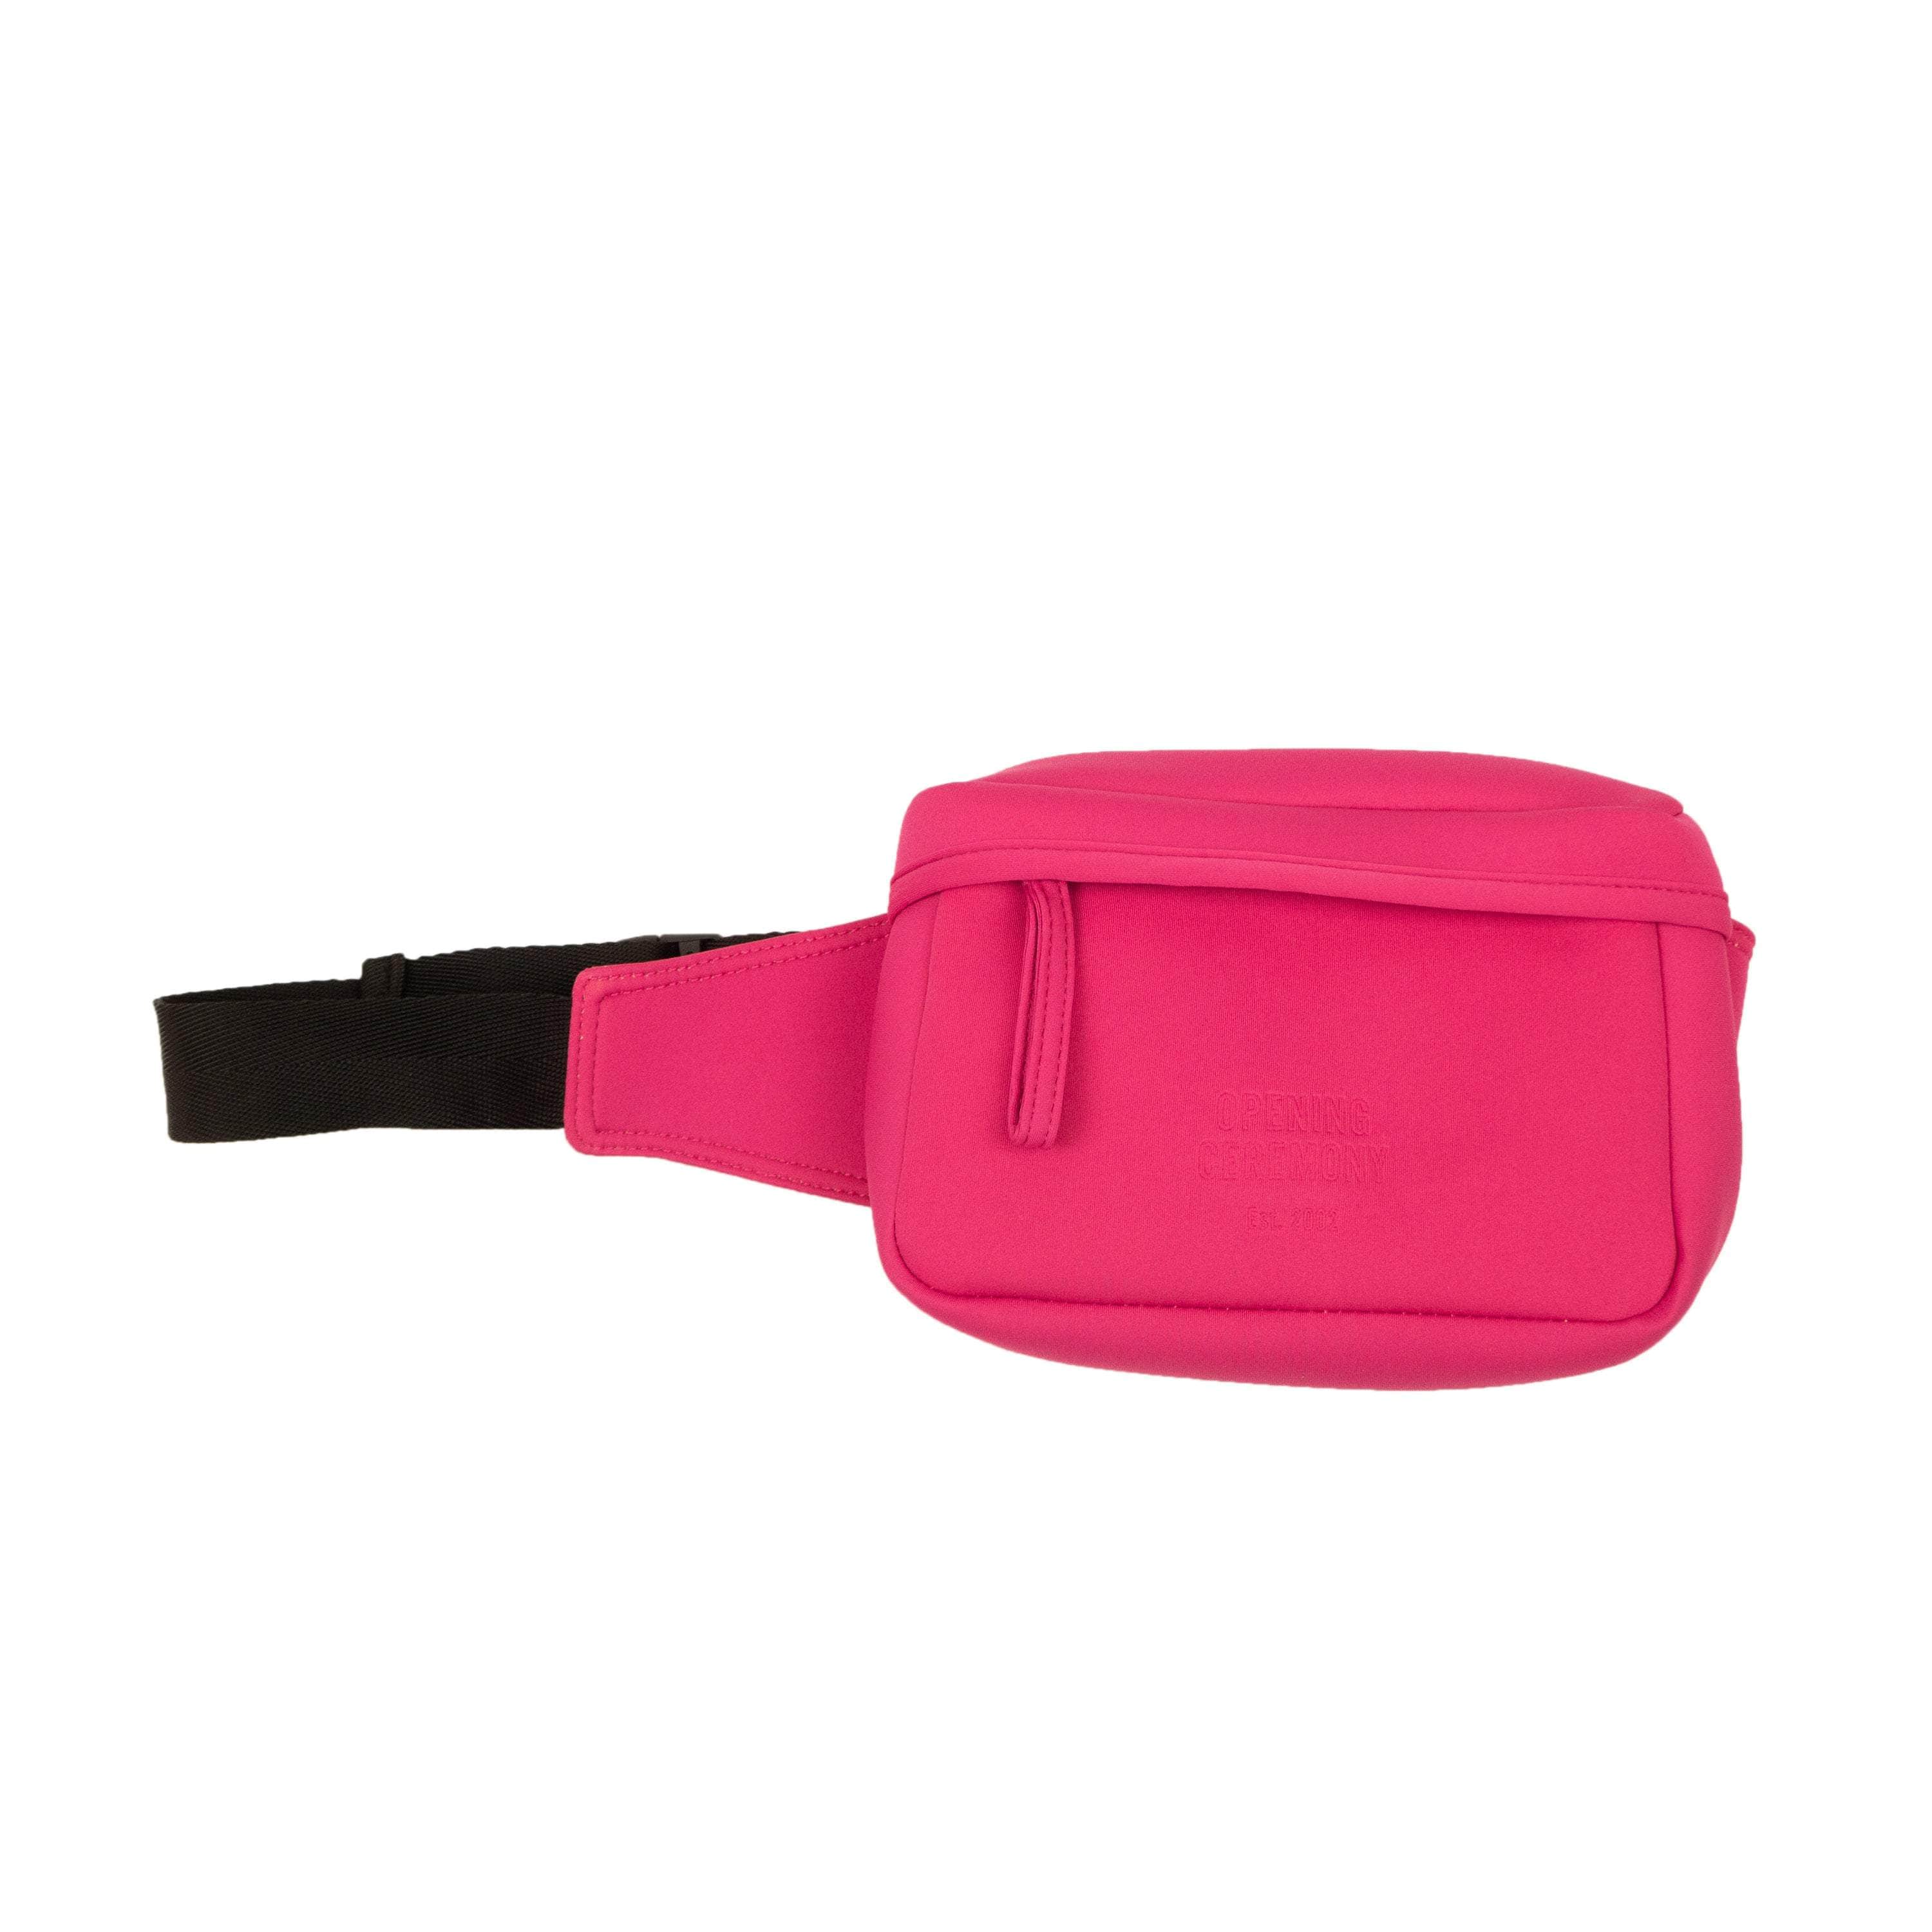 Opening Ceremony channelenable-all, chicmi, couponcollection, gender-mens, gender-womens, main-handbags, mens-shoes, opening-ceremony, size-os, under-250, unisex-bags OS Fluorecent Pink Neoprene Fanny Pack 95-OCY-3046/OS 95-OCY-3046/OS